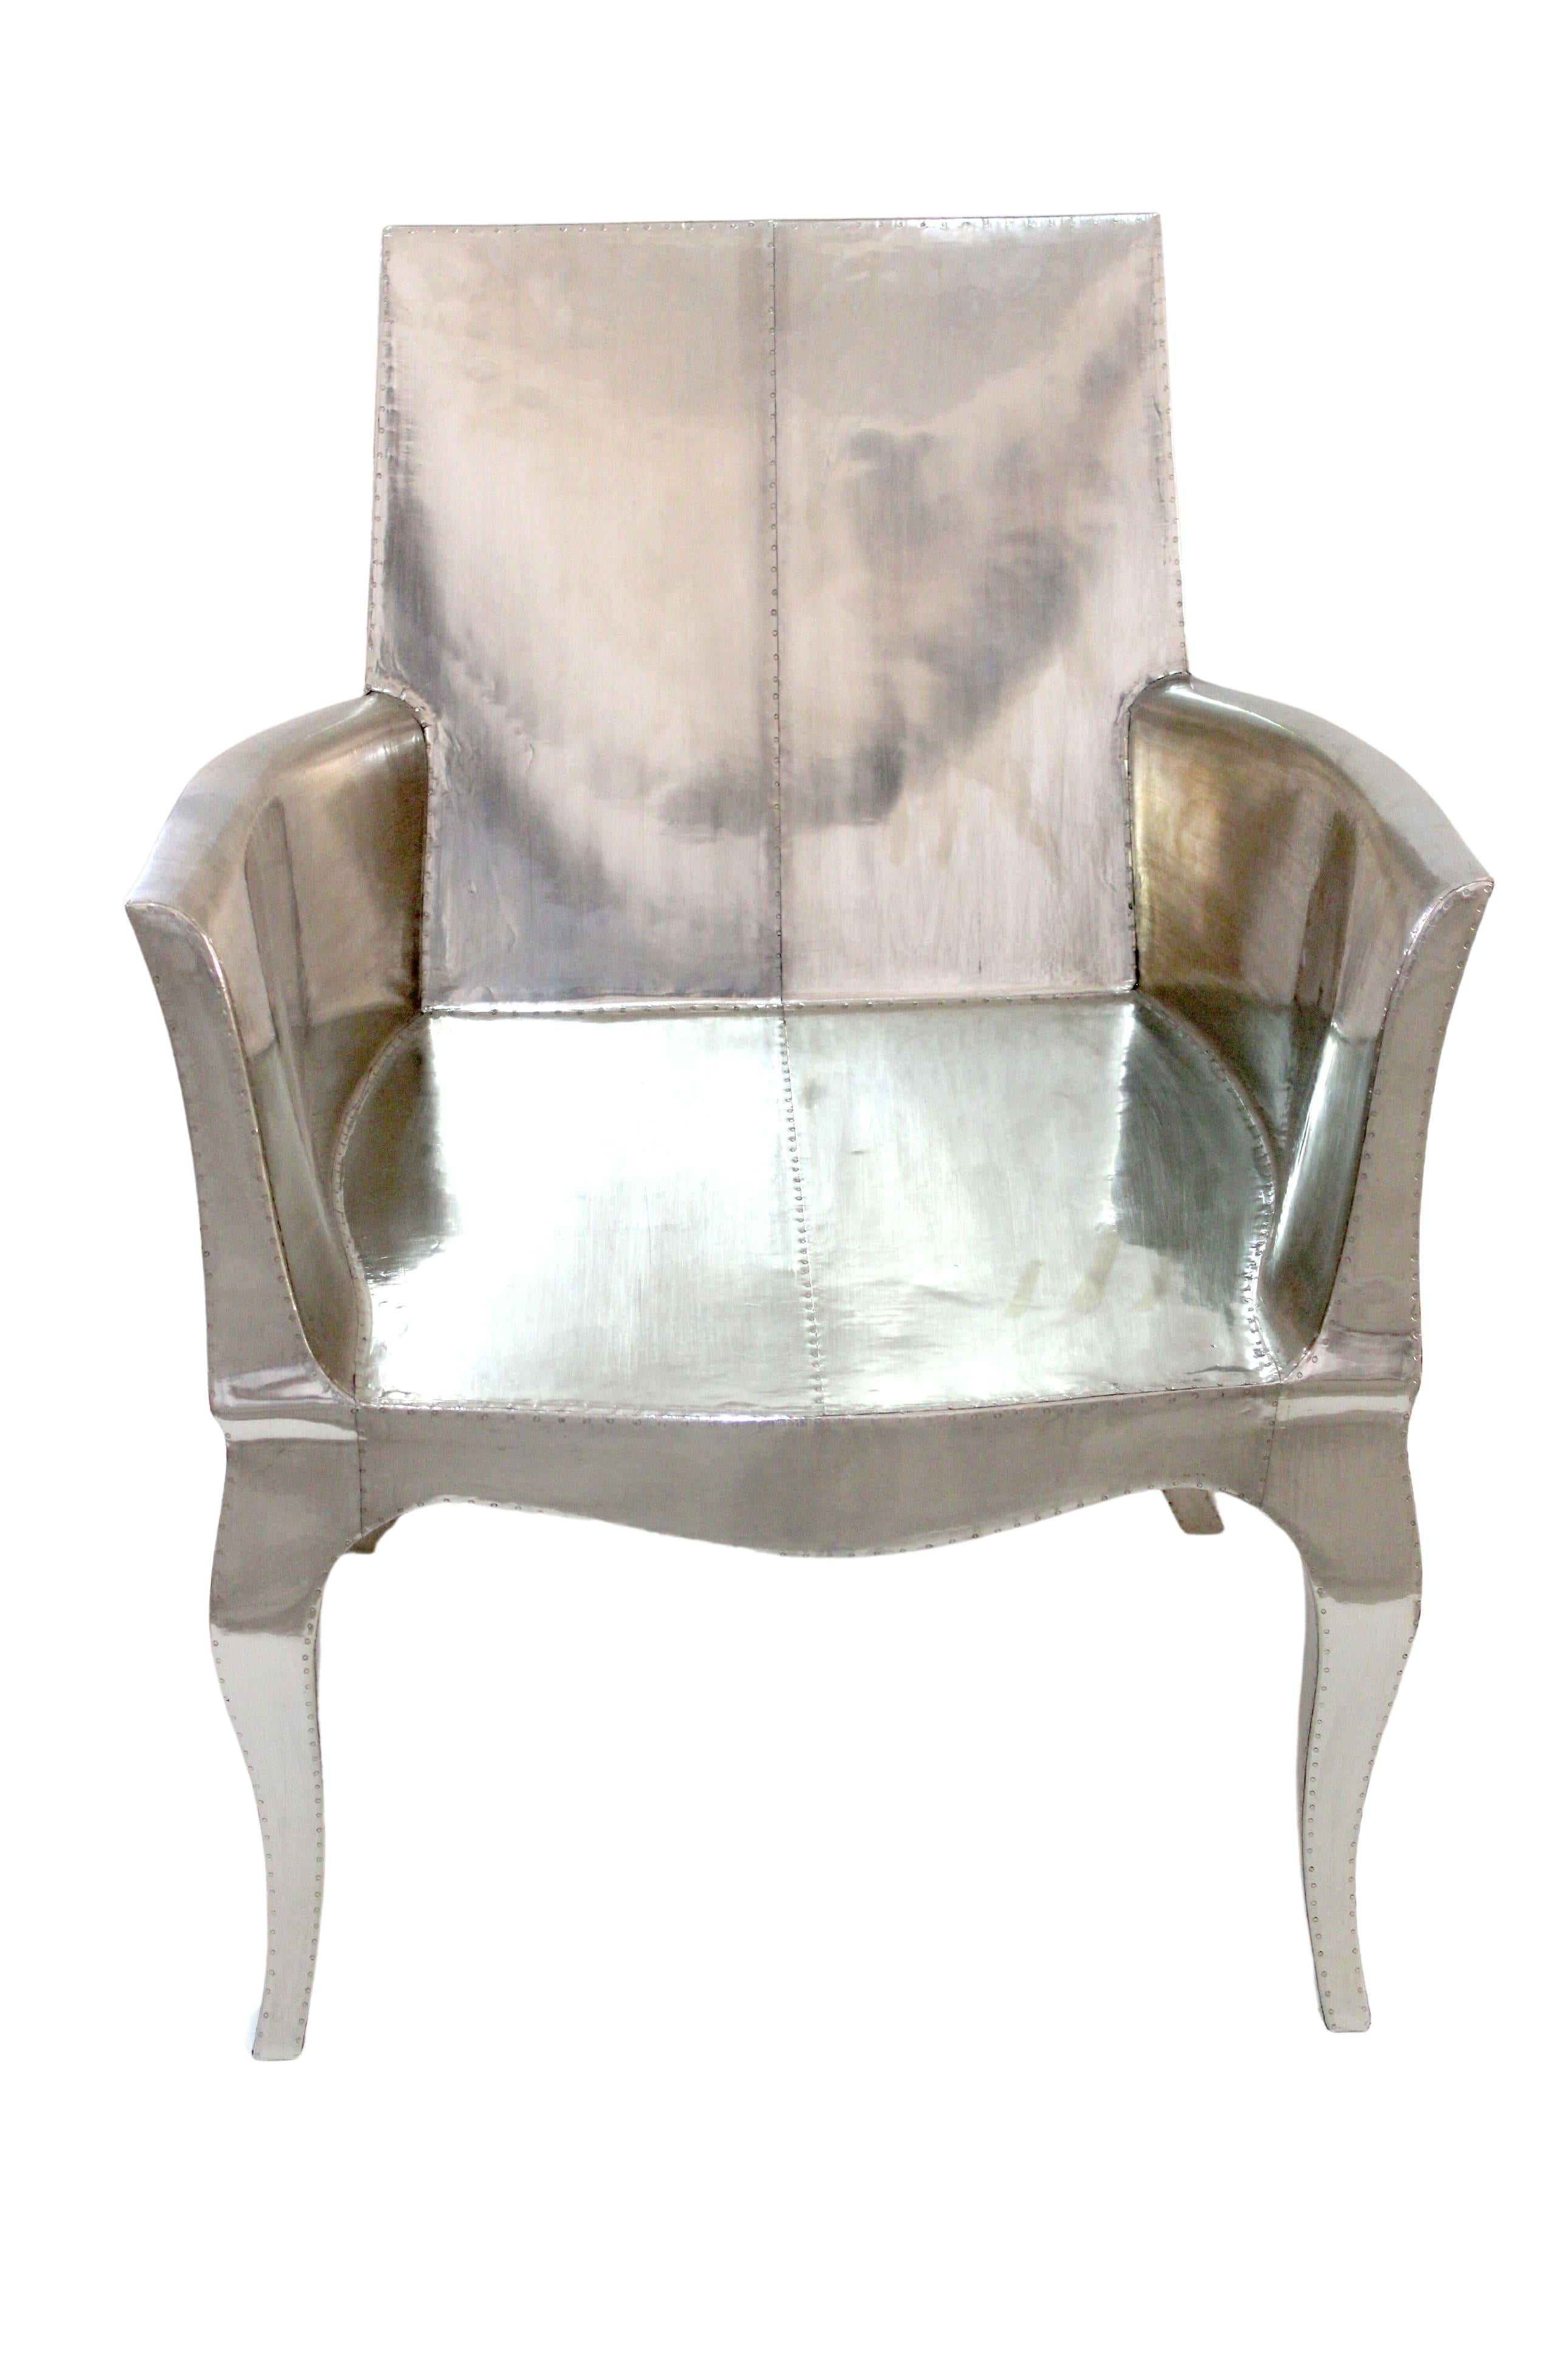 Art Deco Club Chairs Pair Designed by Paul Mathieu for Stephanie Odegard In New Condition For Sale In New York, NY